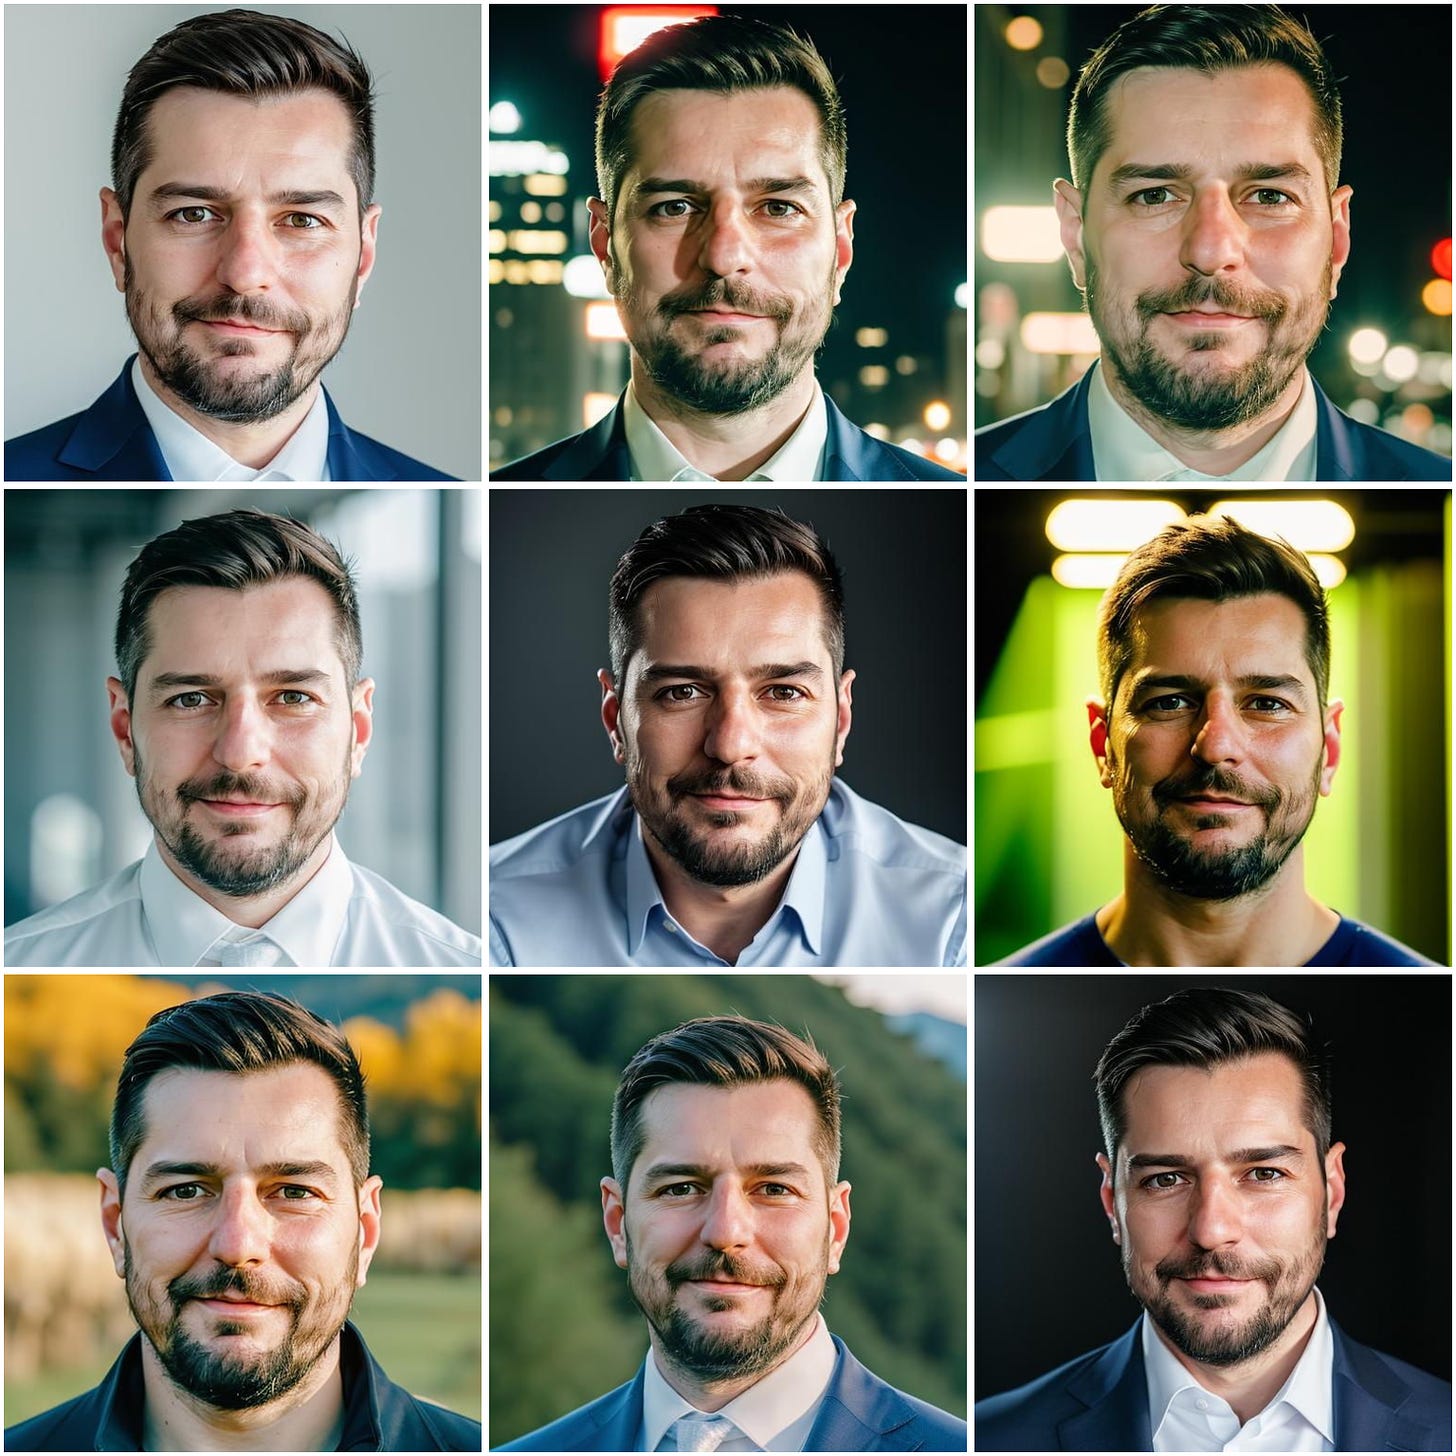 9 photos generated by AI